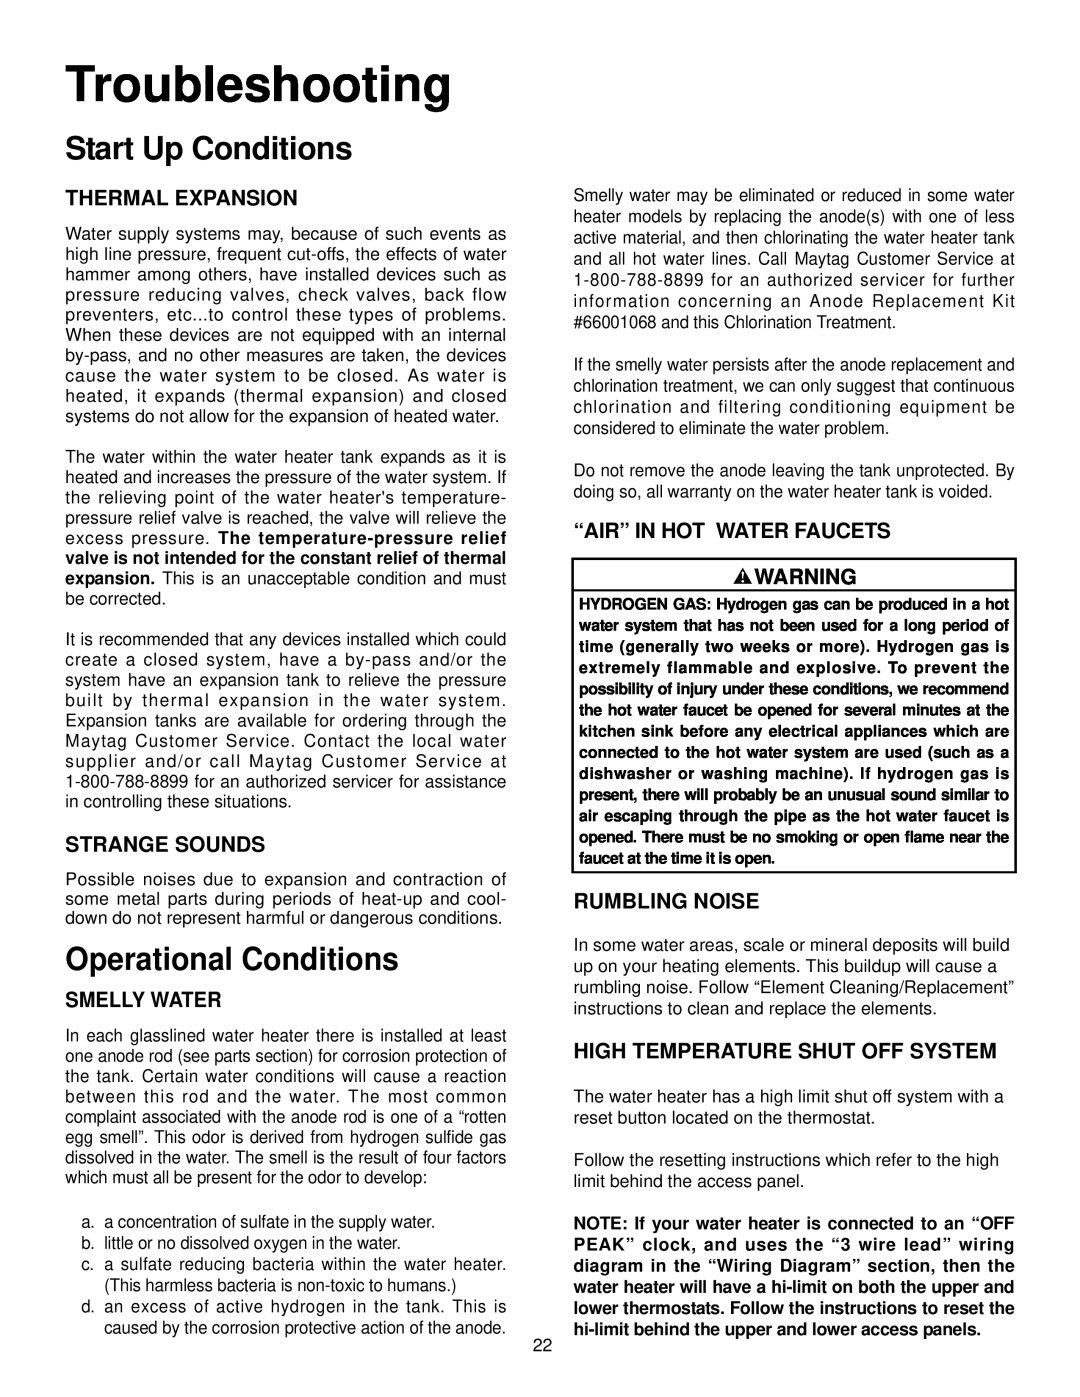 Maytag HR652SJRT manual Troubleshooting, Start Up Conditions, Operational Conditions, Thermal Expansion, Strange Sounds 